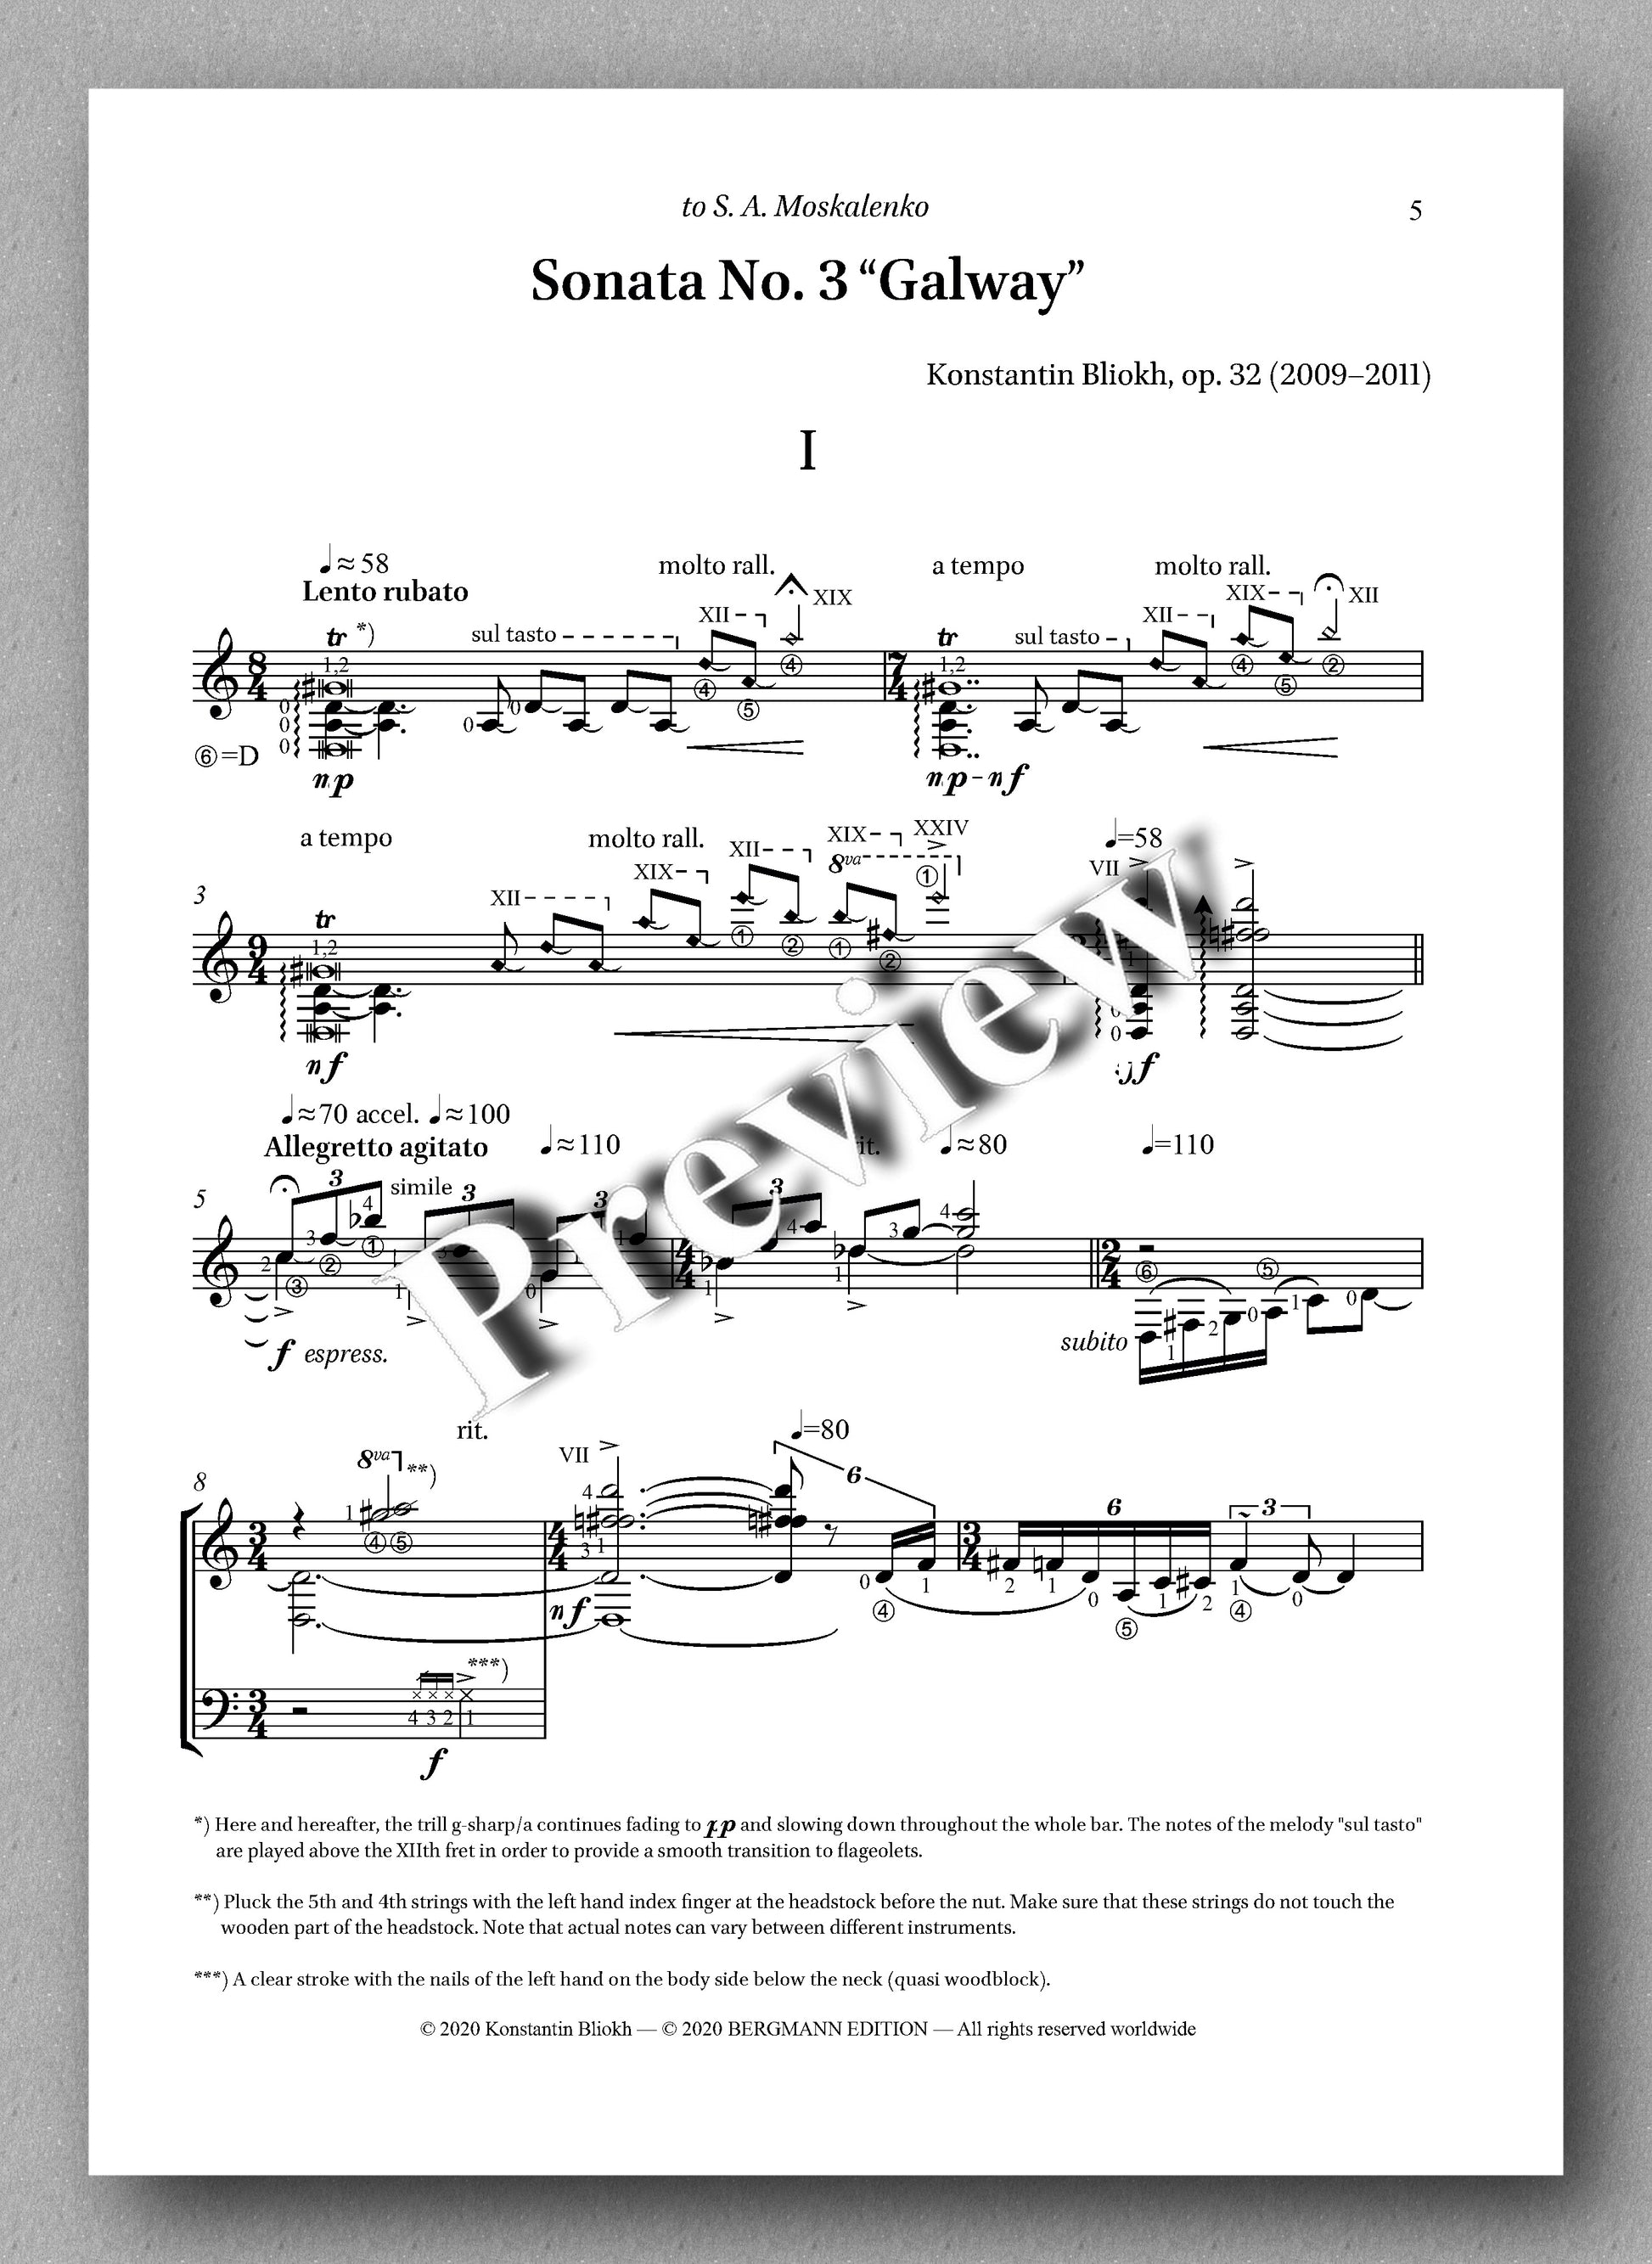 Konstantin Bliokh, Sonata No. 3, GALWAY - preview of the music score 1